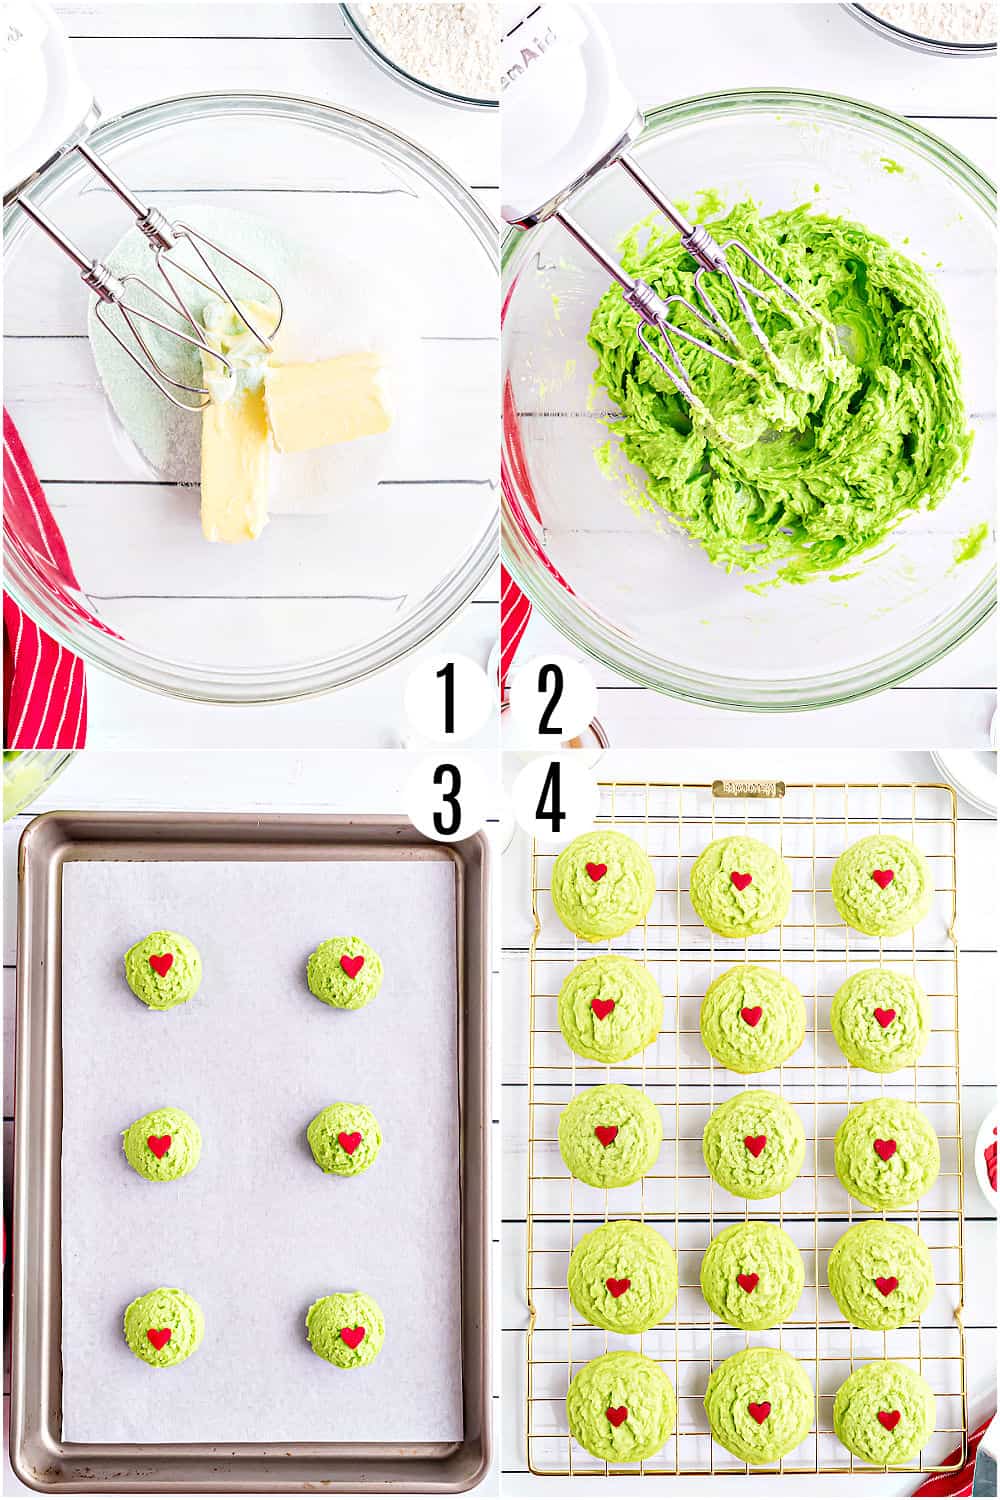 Step by step photos showing how to make grinch cookies.